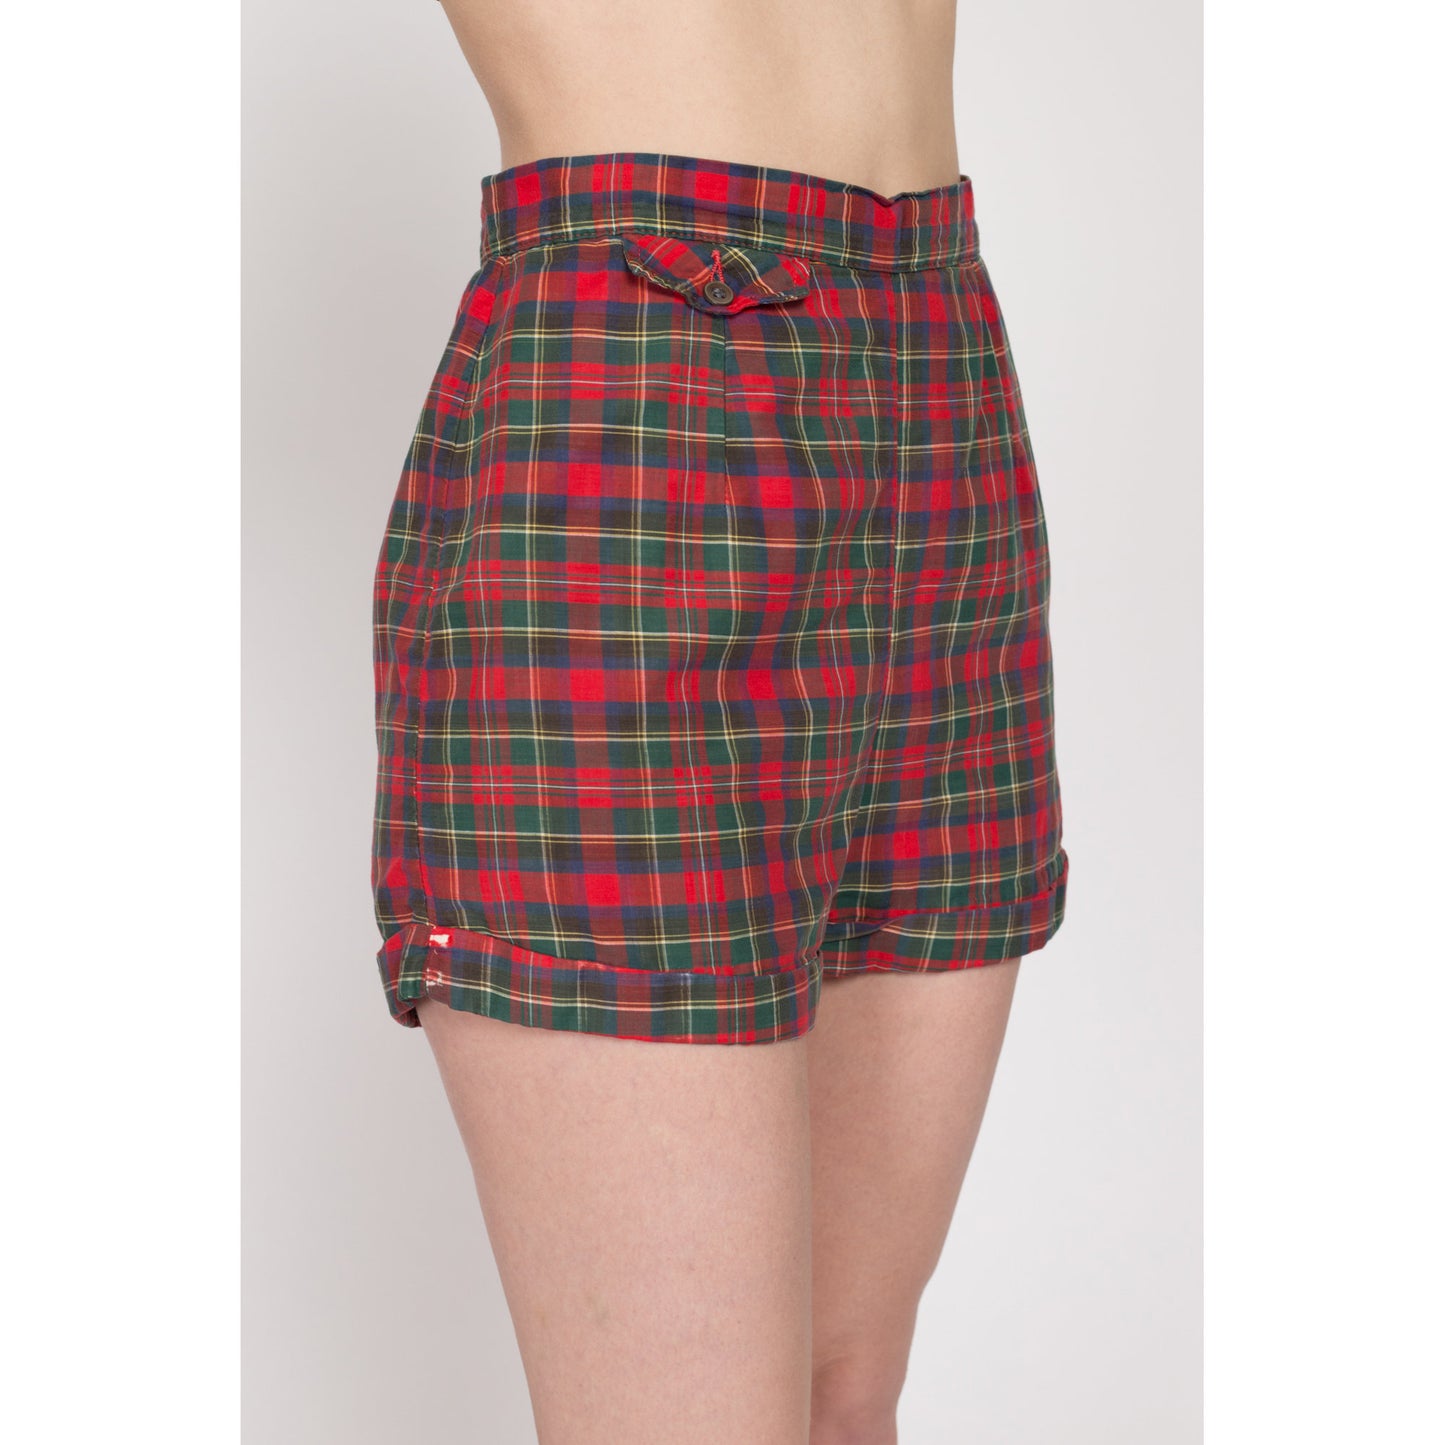 Small 1950s Jantzen Red Plaid High Waisted Pin Up Shorts 26" | Retro Vintage 50s Rockabilly Cotton Cuffed Mini Shorts